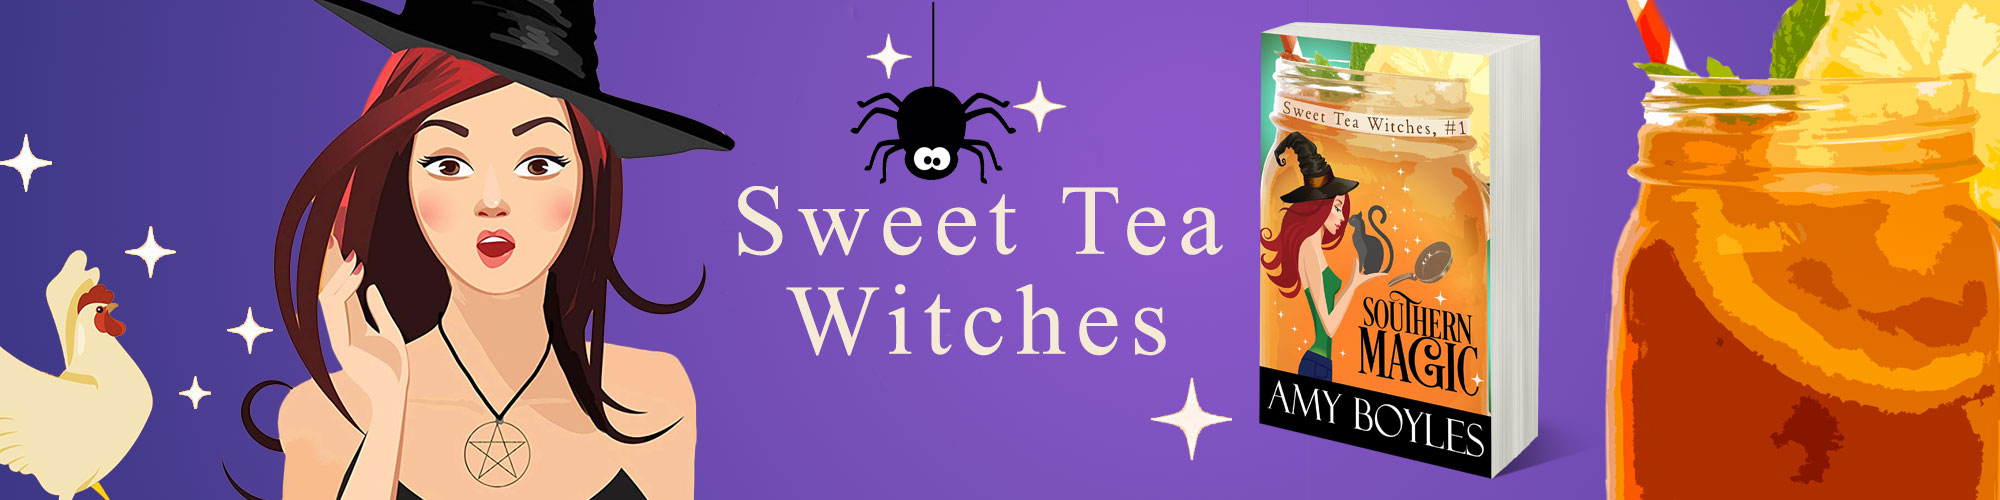 Sweet Tea Witches